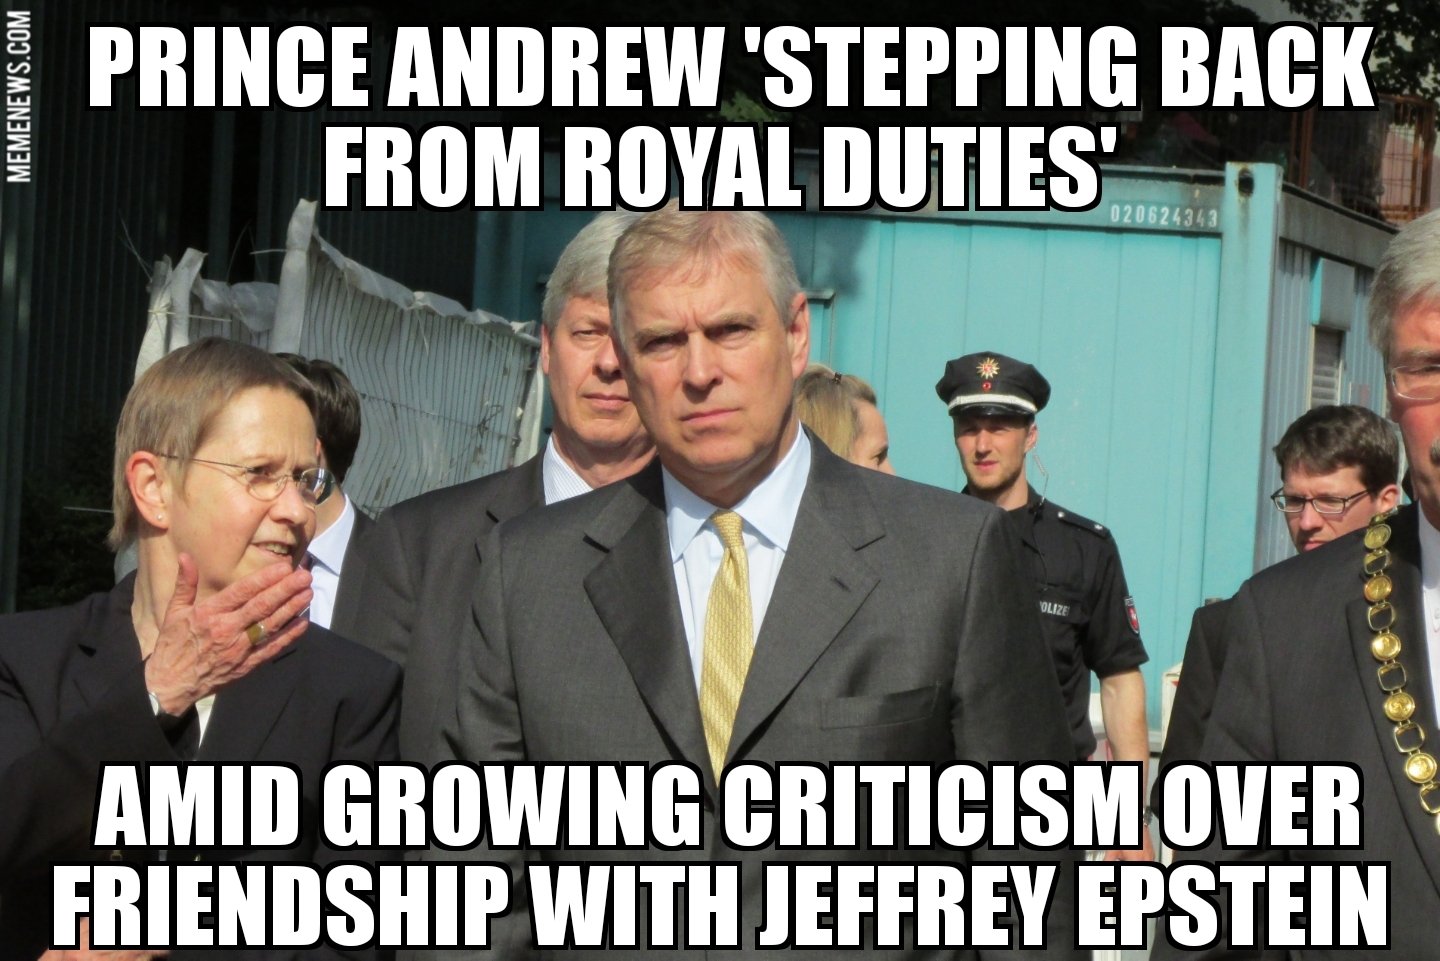 Prince Andrew ‘stepping back from Royal duties’